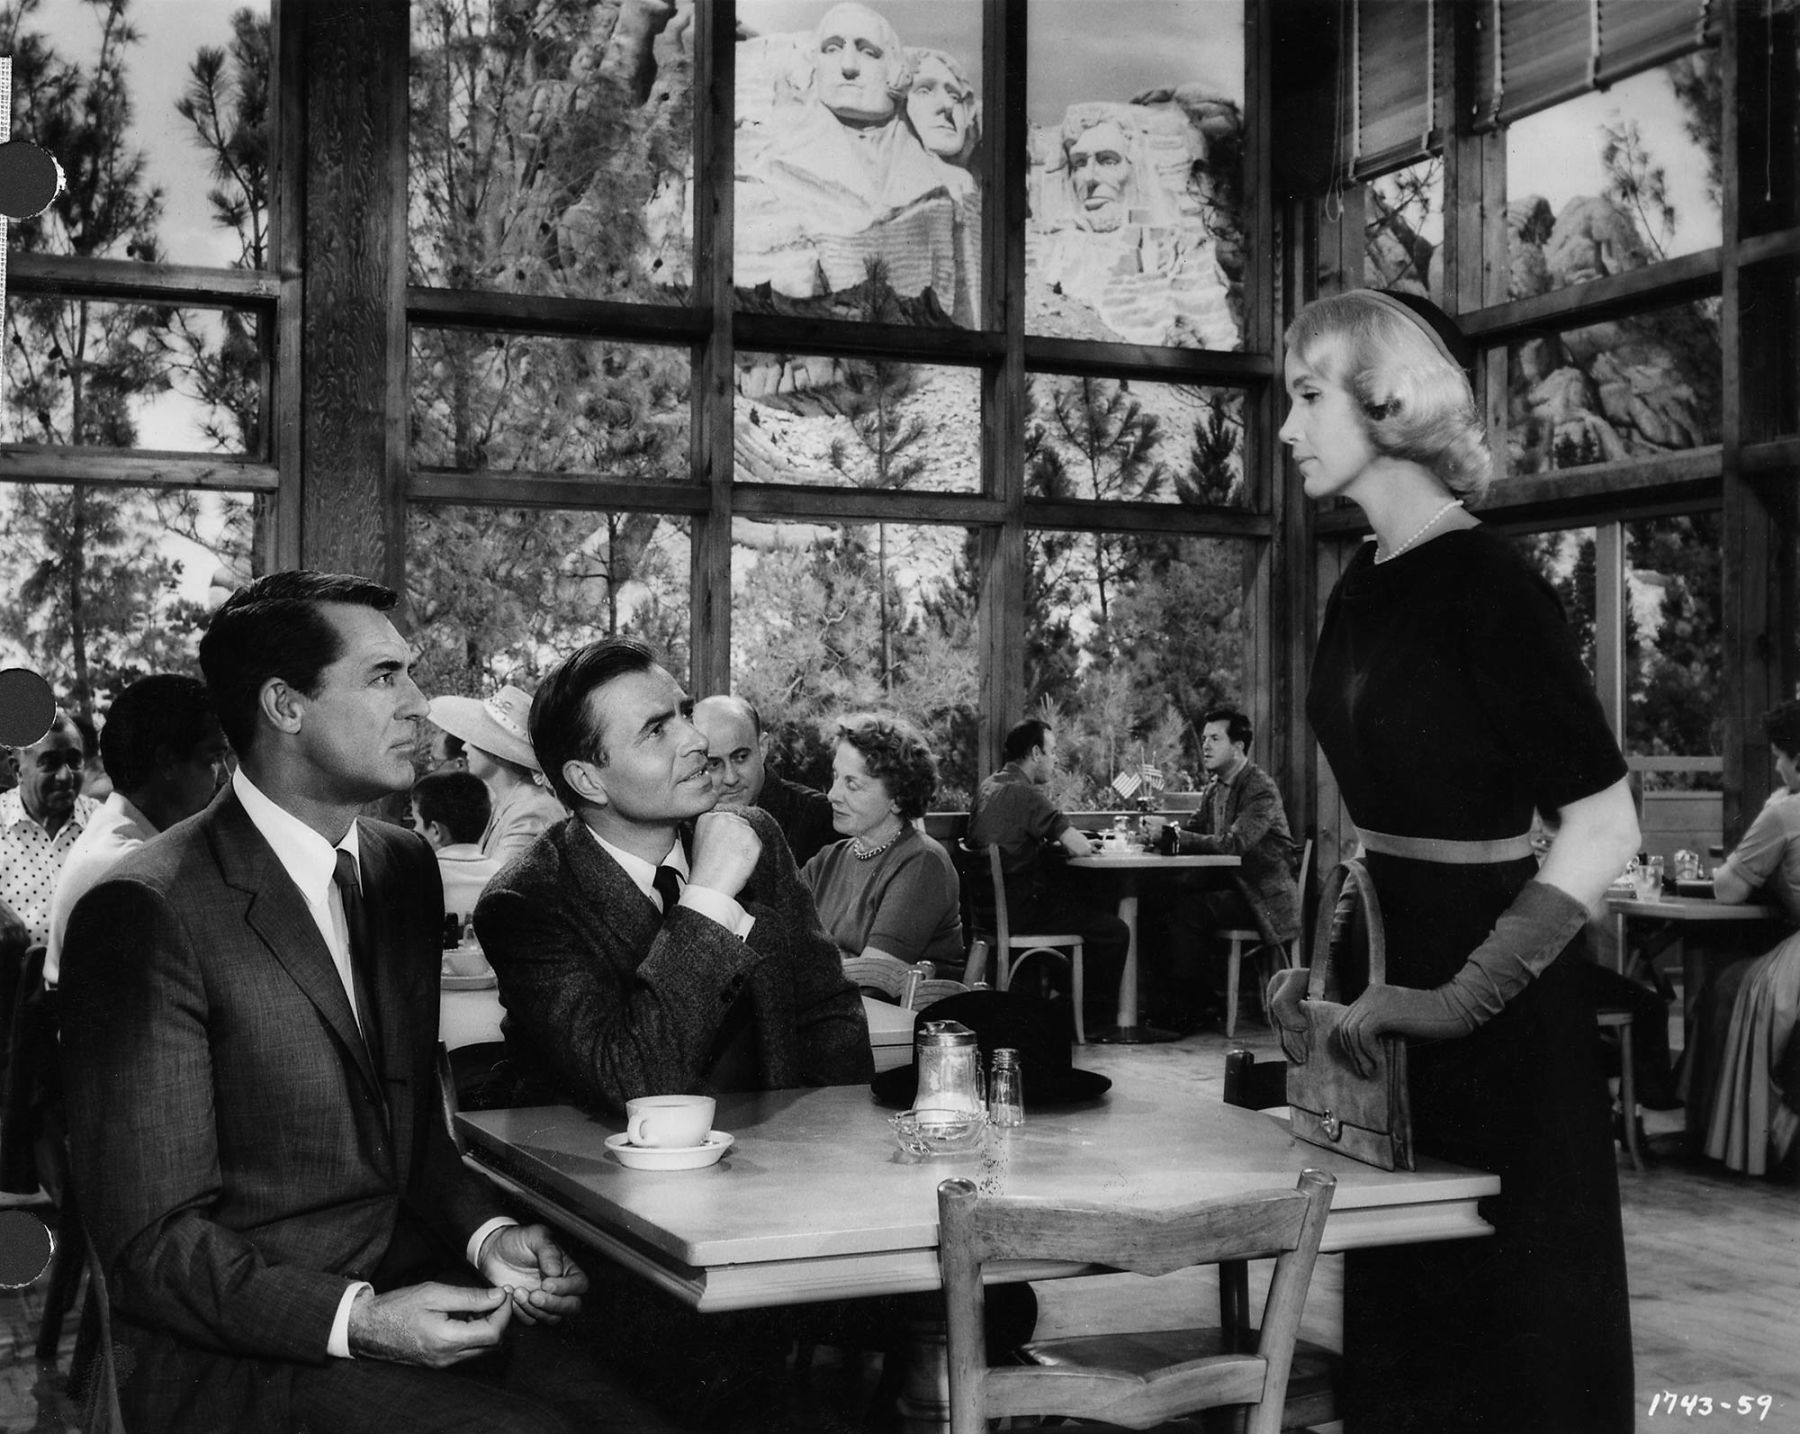 Cary Grant, James Mason, and Eva Marie Saint, production still, NORTH BY NORTHWEST (USA, 1959). Courtesy of Metro-Goldwyn-Mayer Production and Biography Photographs, Margaret Herrick Library, Academy of Motion Picture Arts and Sciences. 